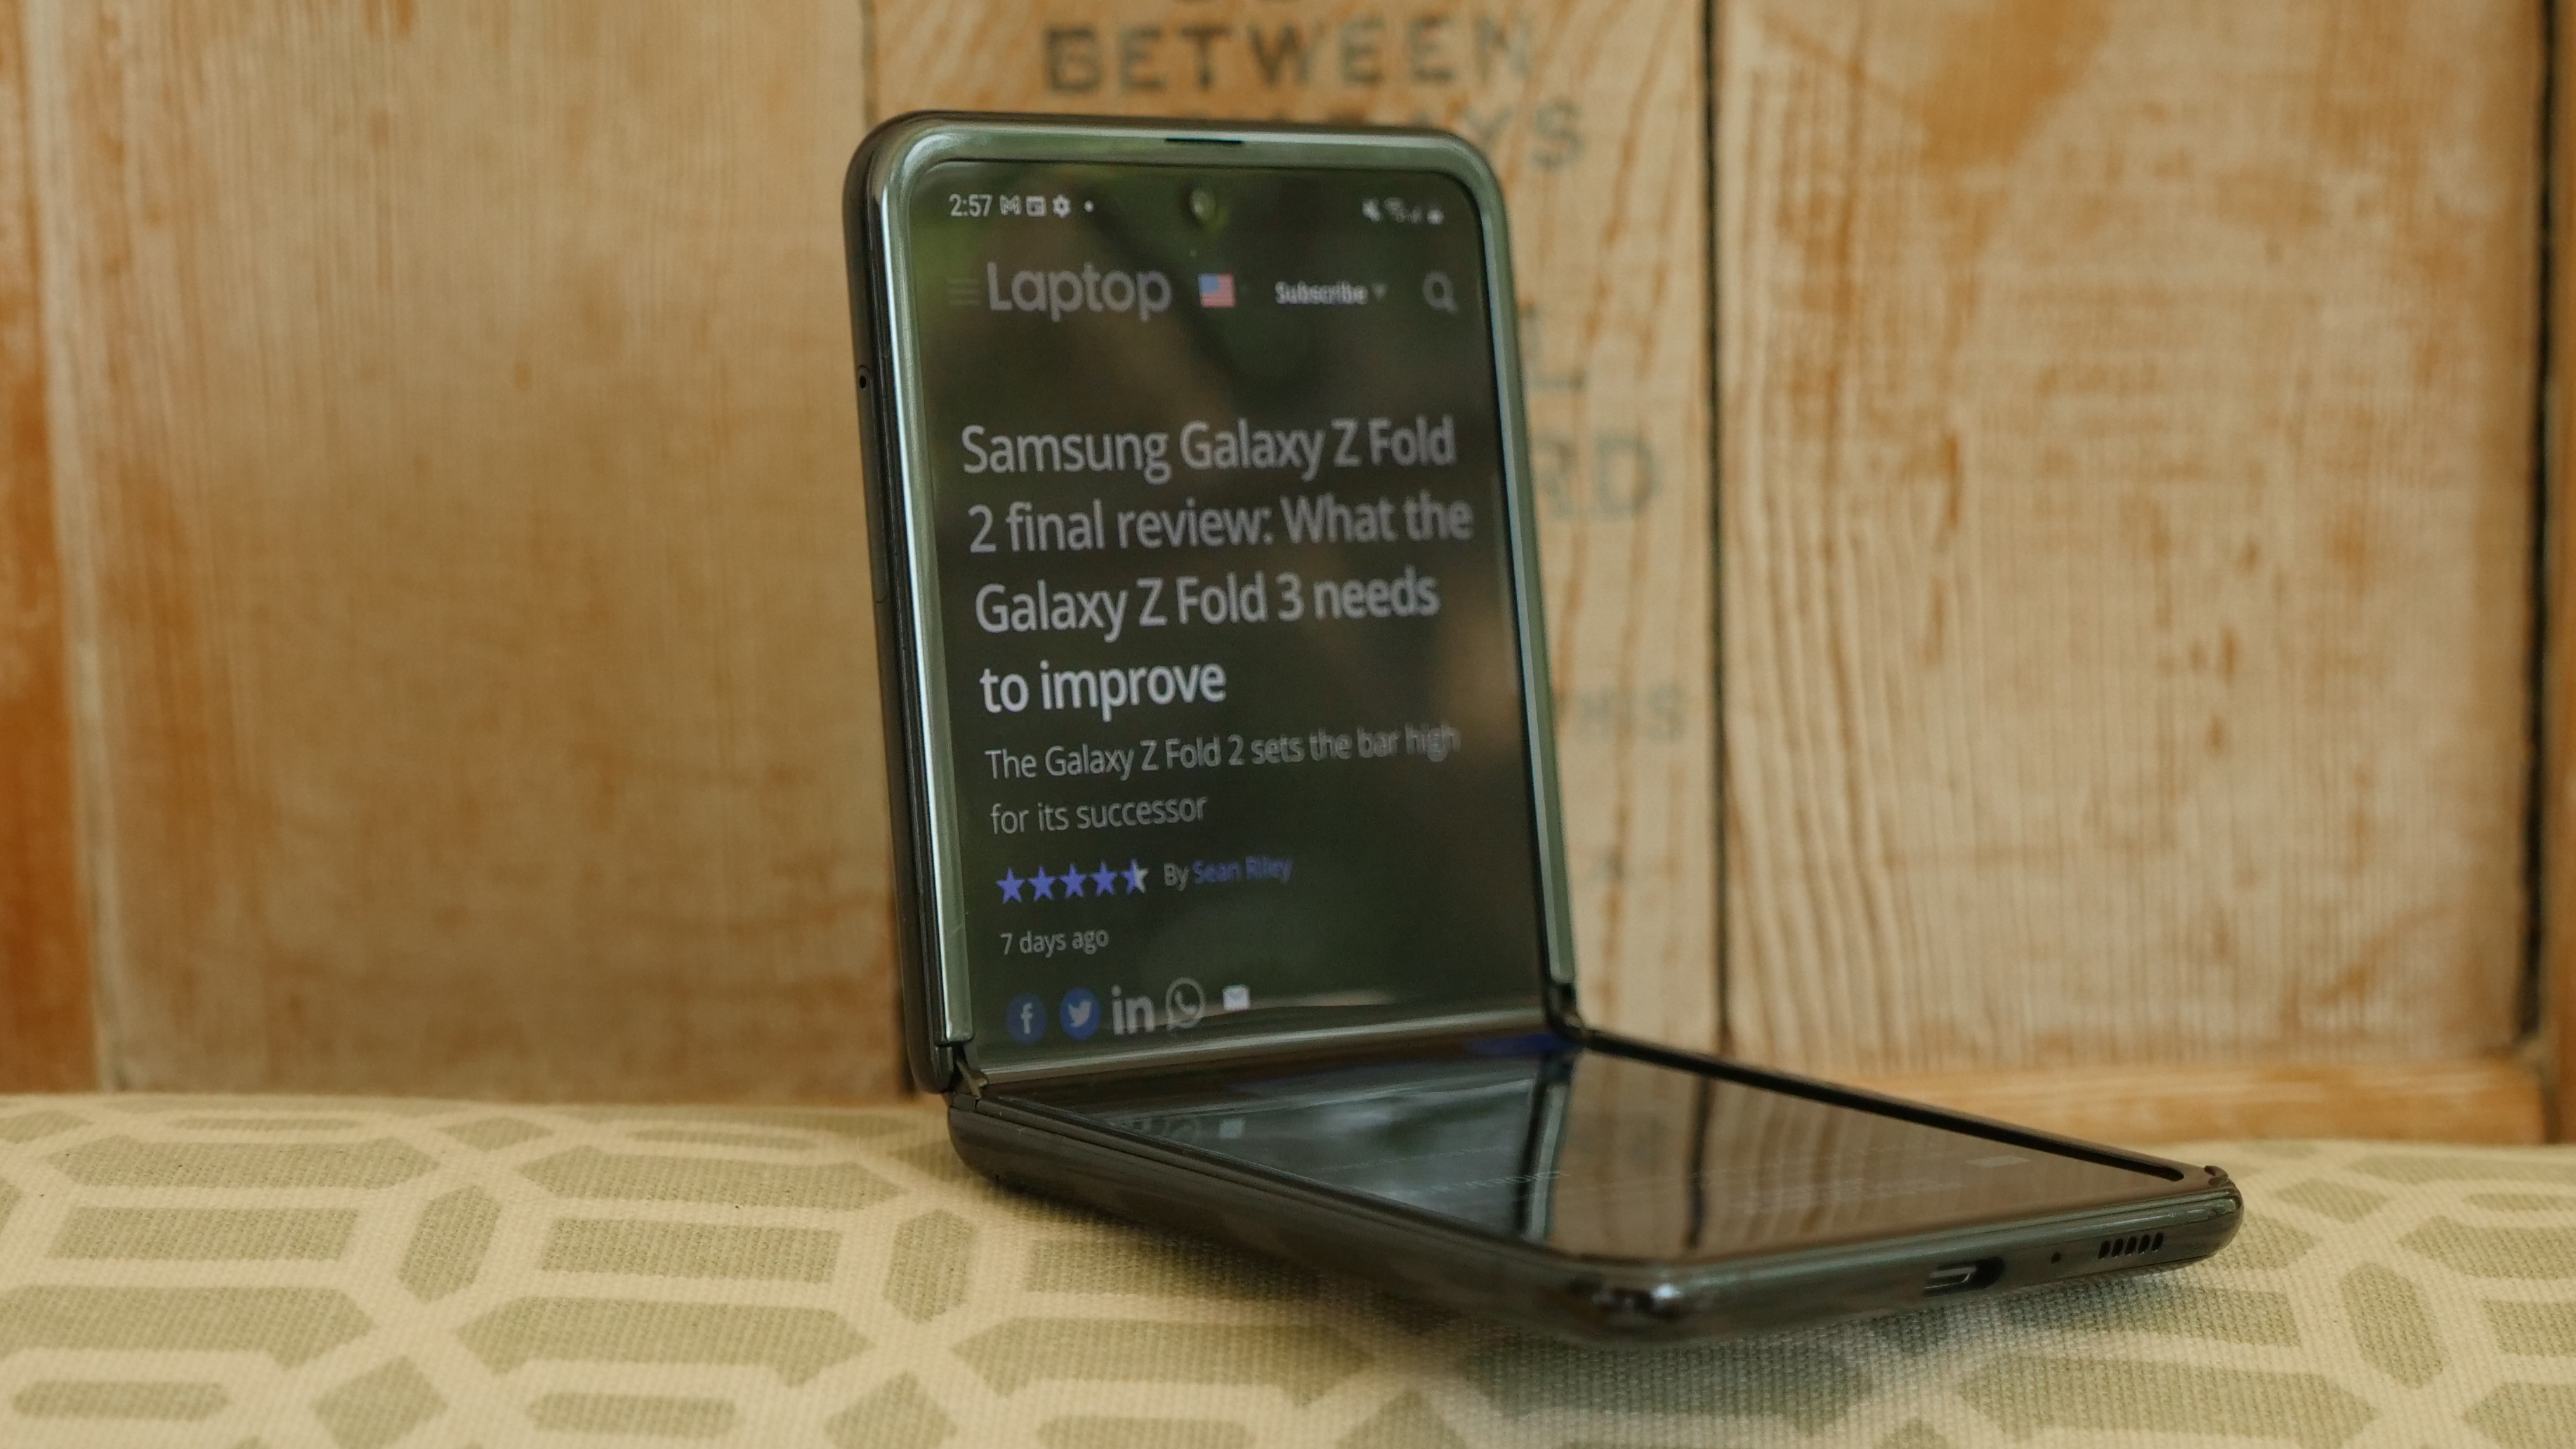 Samsung Galaxy Z Flip 5 Review: a Big Improvement to the Clamshell Foldable